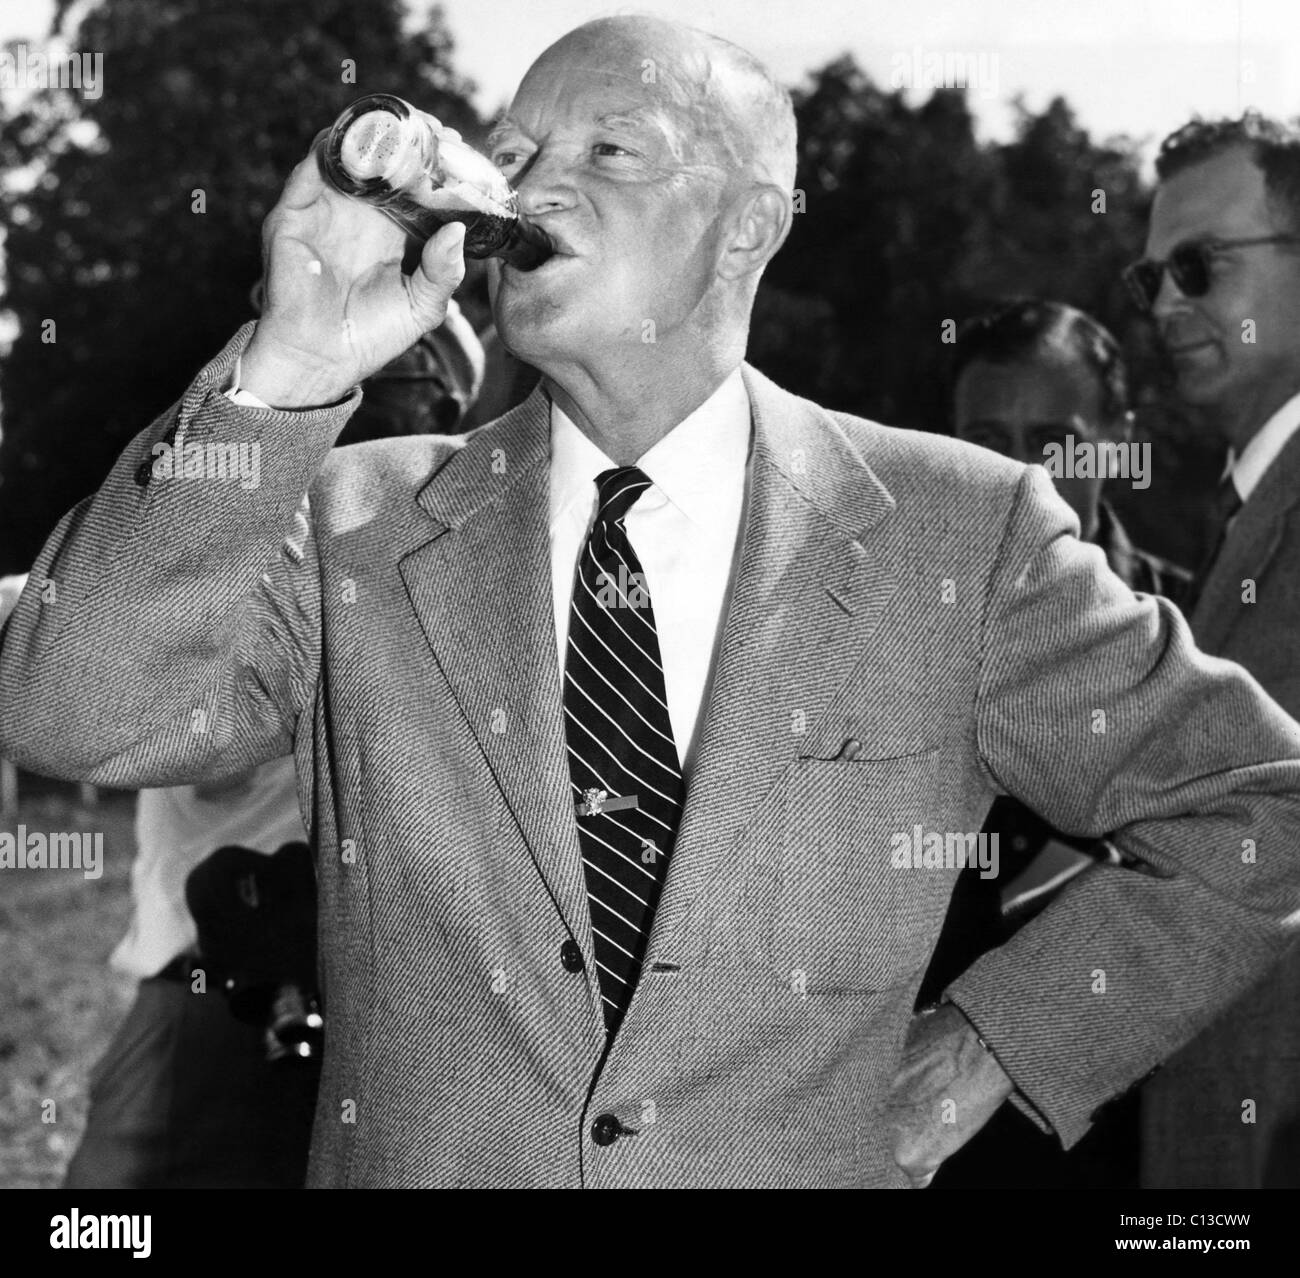 President Dwight D. Eisenhower downing a soft drink. 9/13/53. Stock Photo